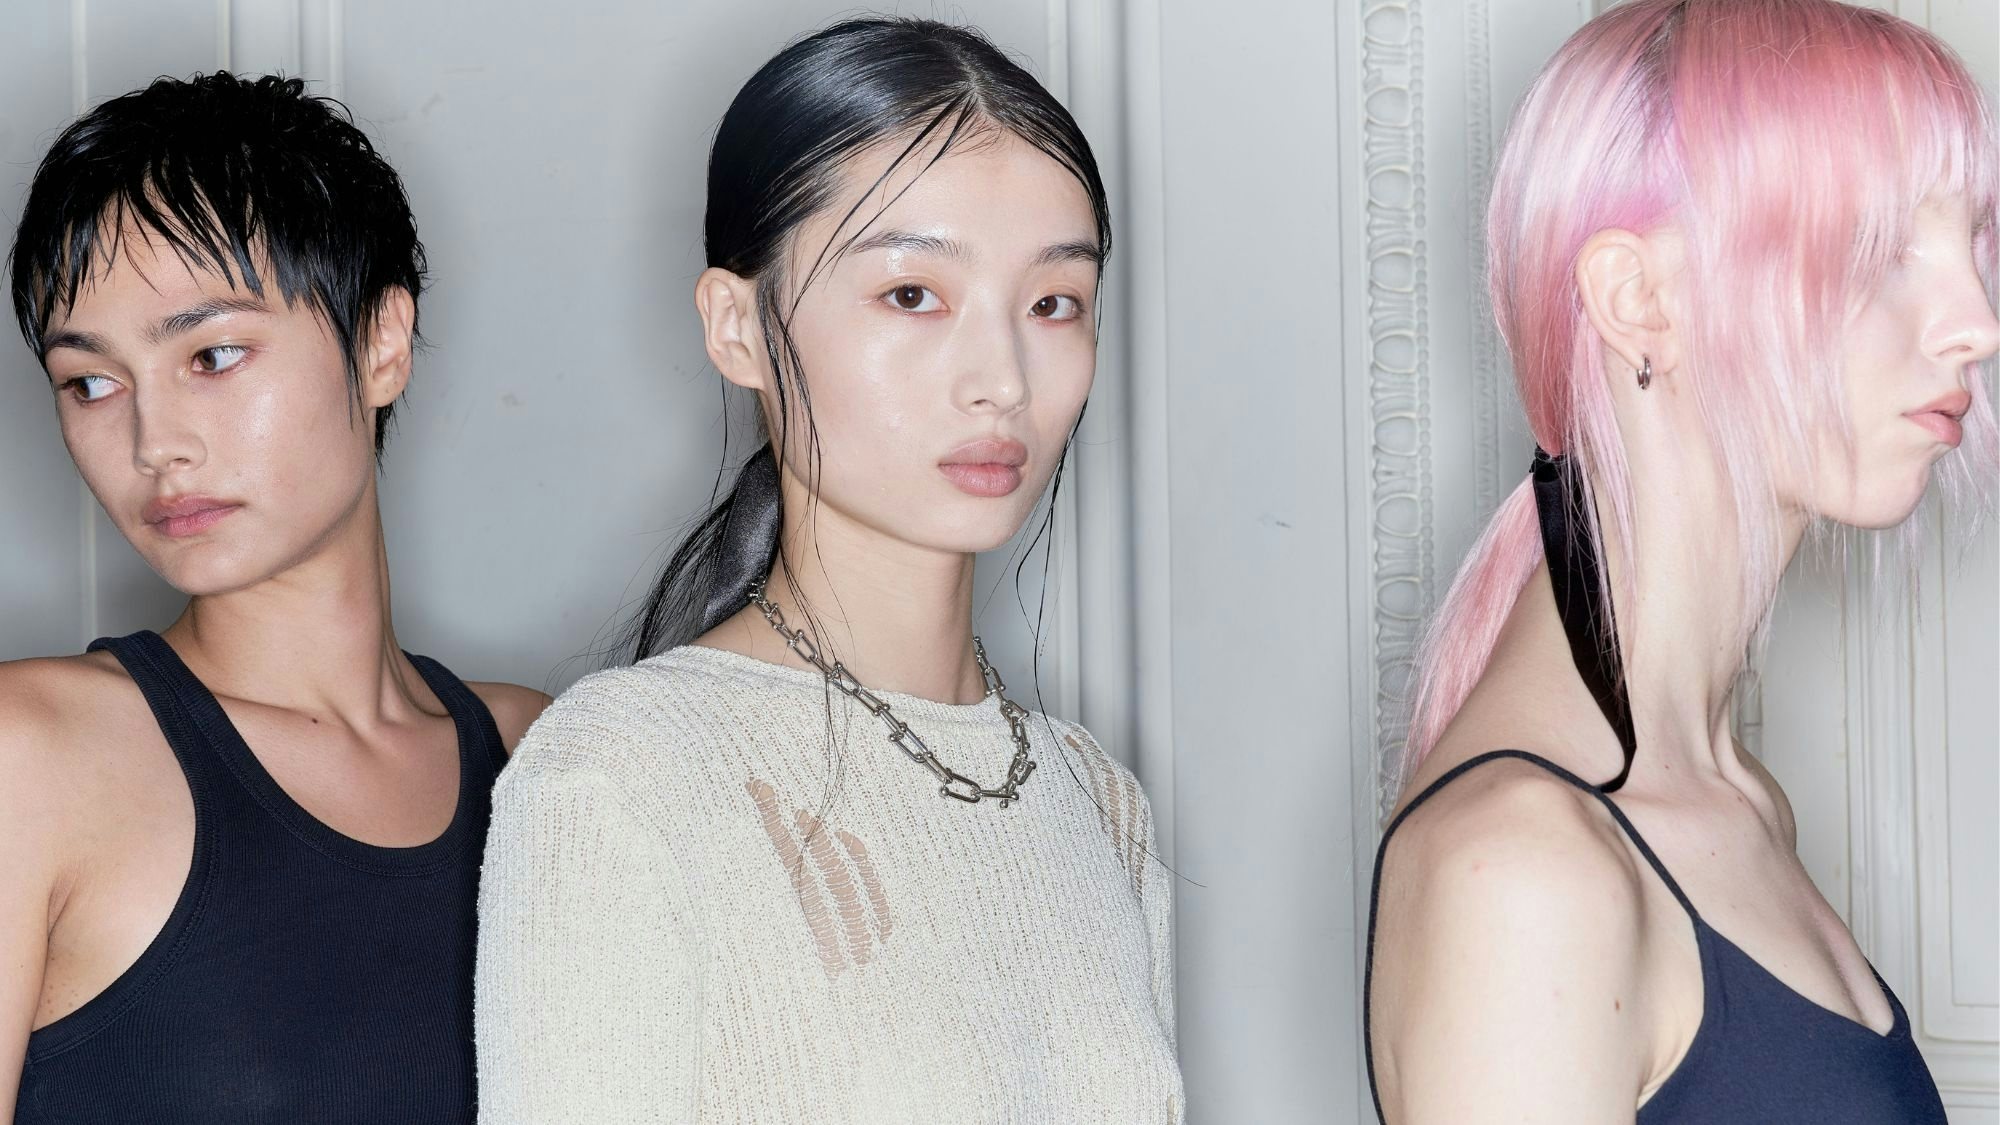 Not often venturing into the brand collaboration space, Didu showcased a rare collab with Add Milano at the PFW show. Photo: Didu/ Fifi Chen & Julien Soulier